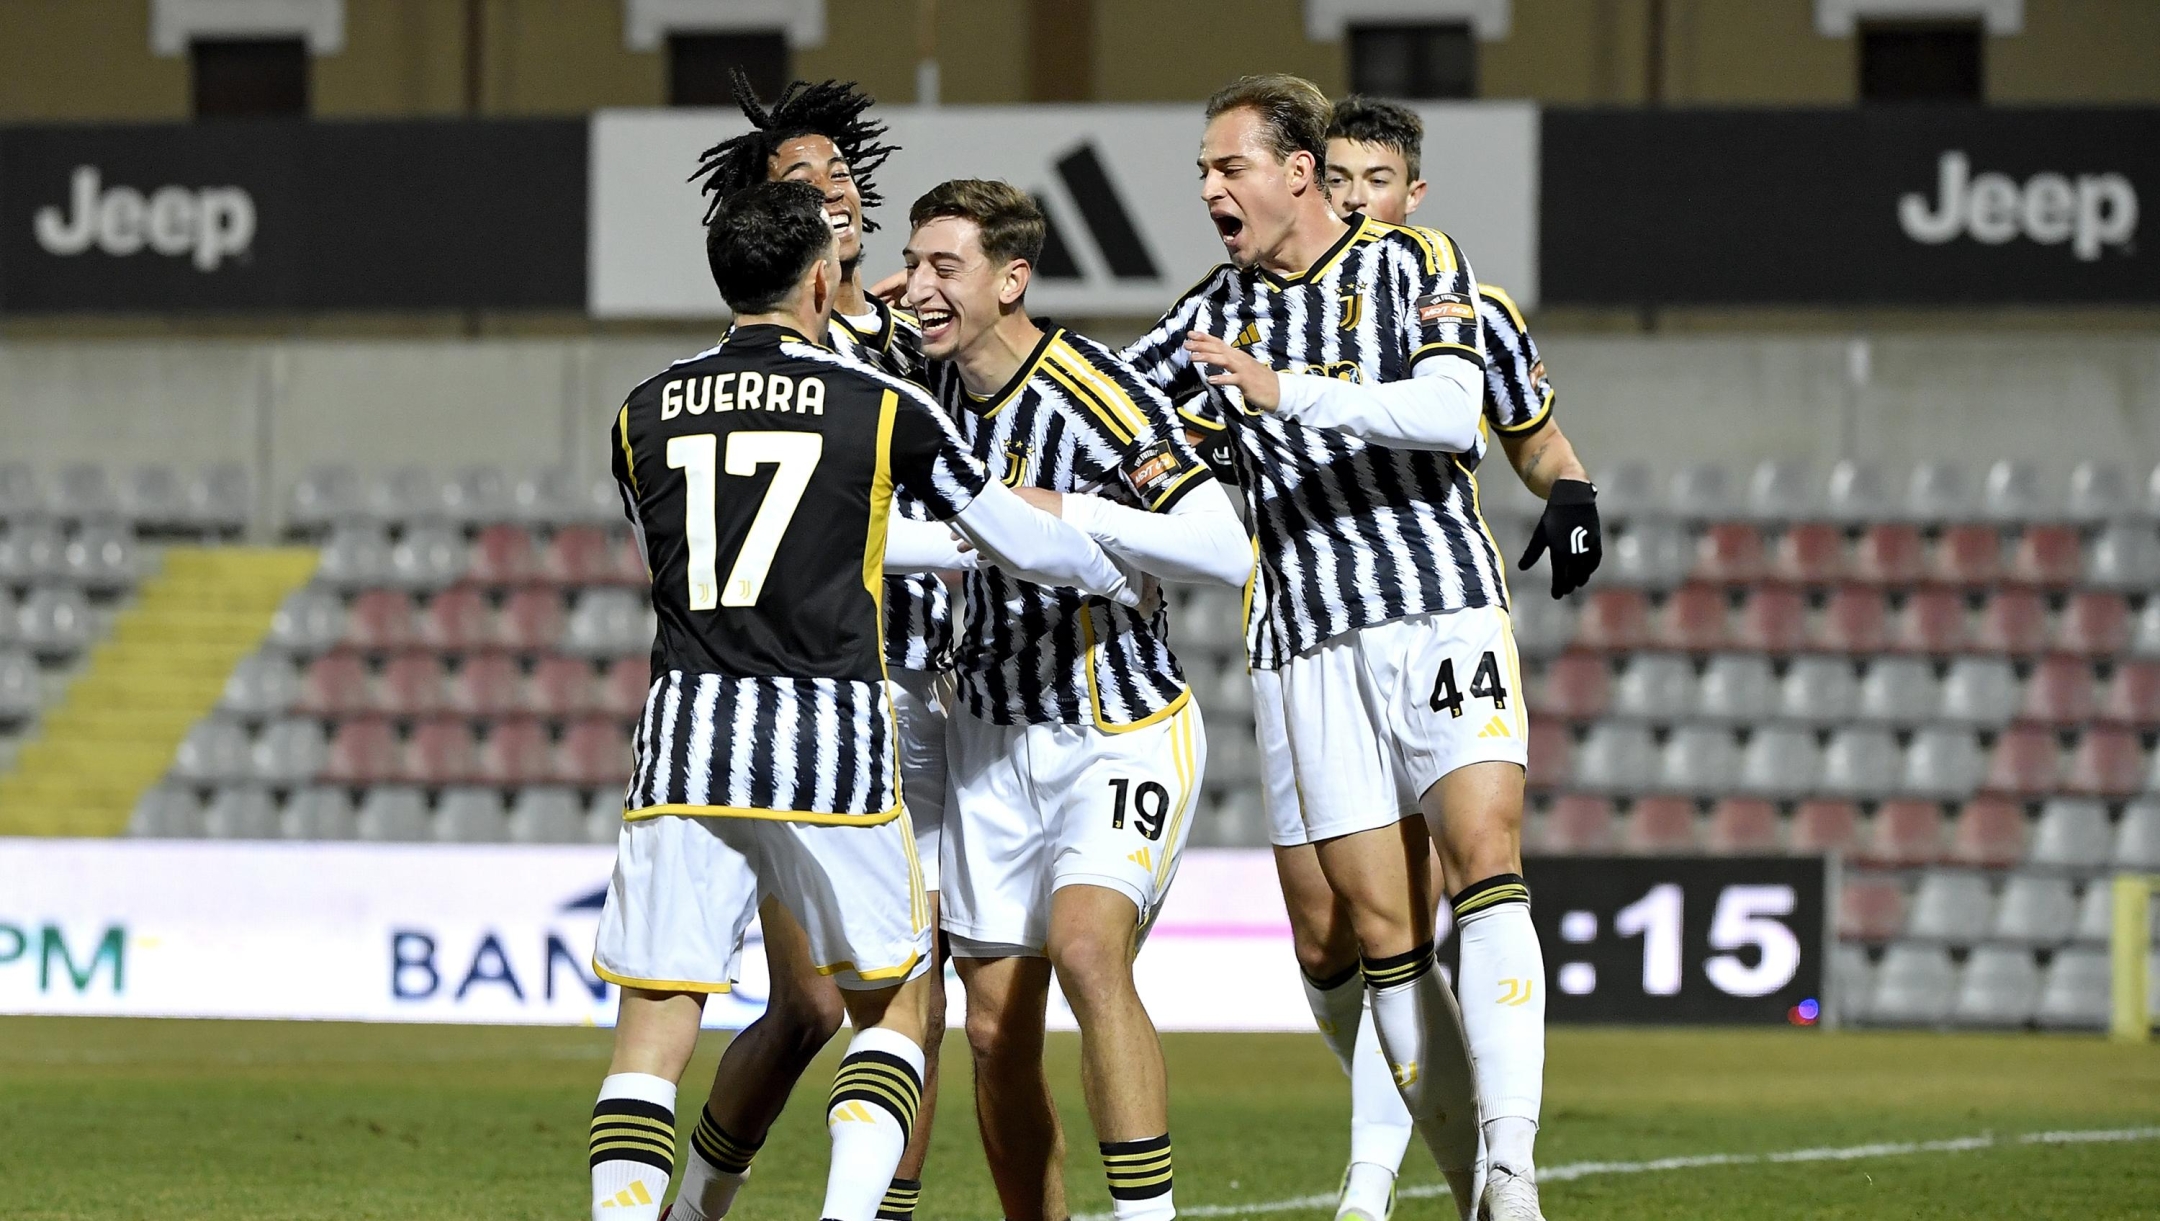 ALESSANDRIA, ITALY - FEBRUARY 14: Jonas Rouhi of Juventus celebrates after scoring a goal during the Serie C match between Juventus Next Gen and Sestri Levante at Stadio Giuseppe Moccagatta on February 14, 2024 in Alessandria, Italy. (Photo by Filippo Alfero - Juventus FC/Juventus FC via Getty Images)